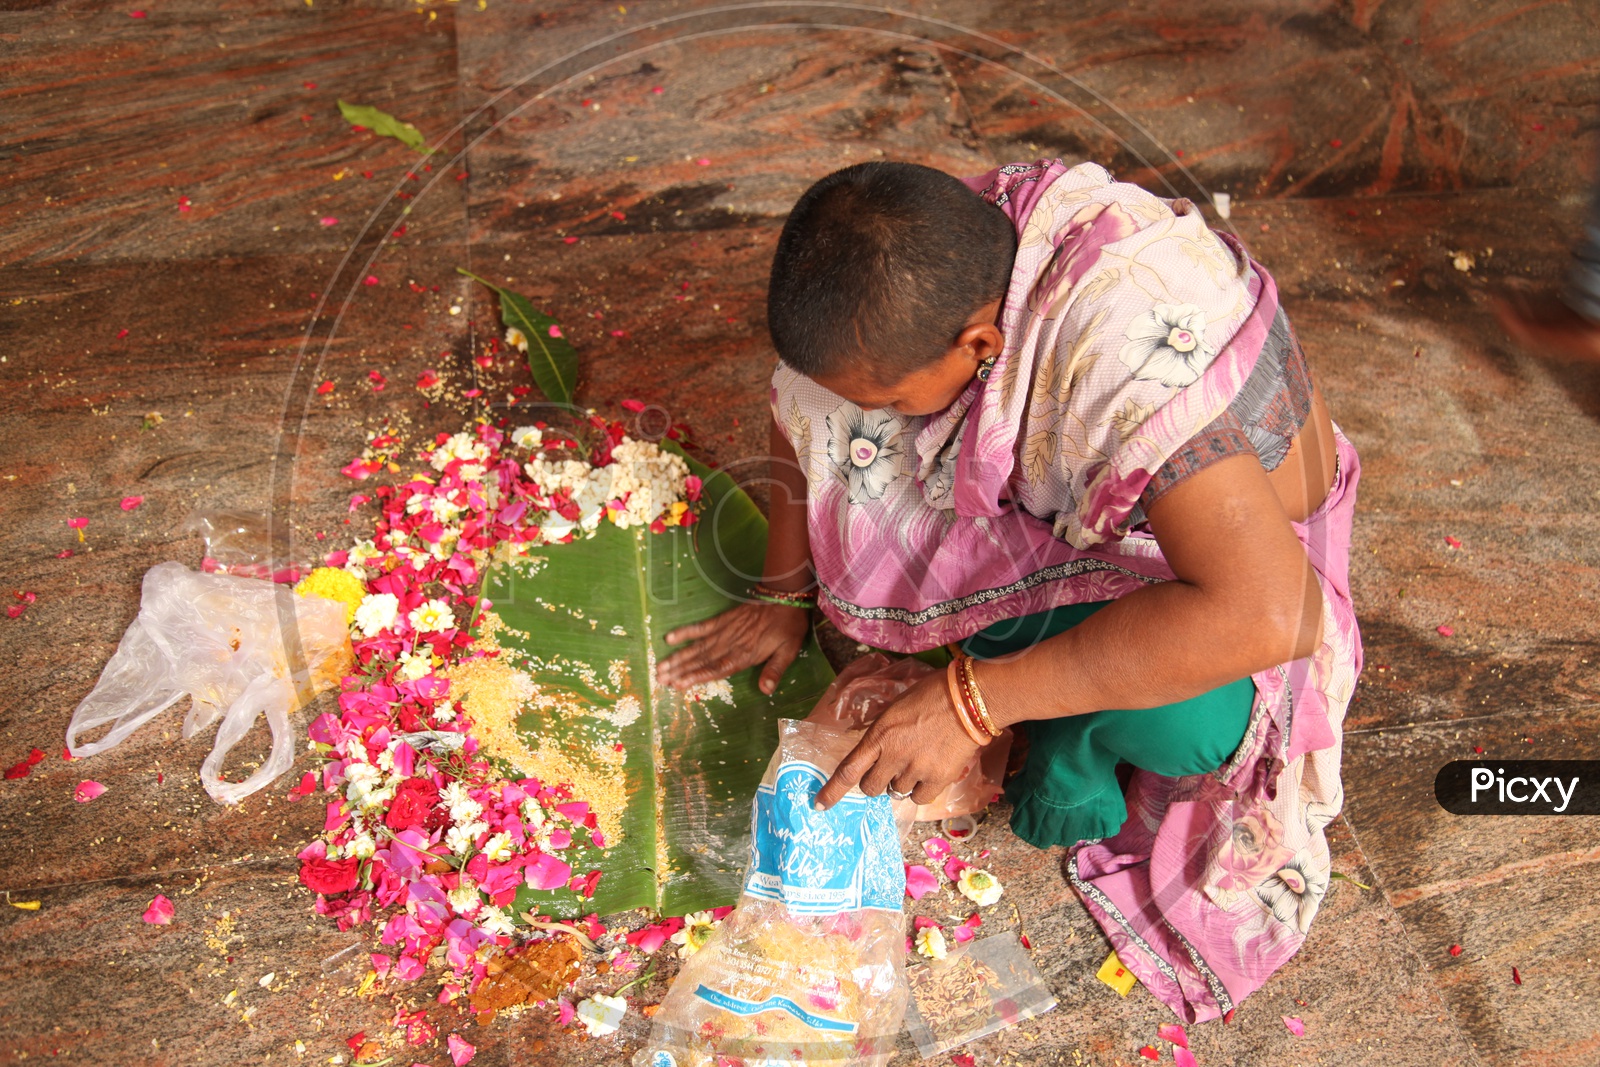 A woman devotee collecting the flowers and other puja items into a plastic cover from a plantain leaf